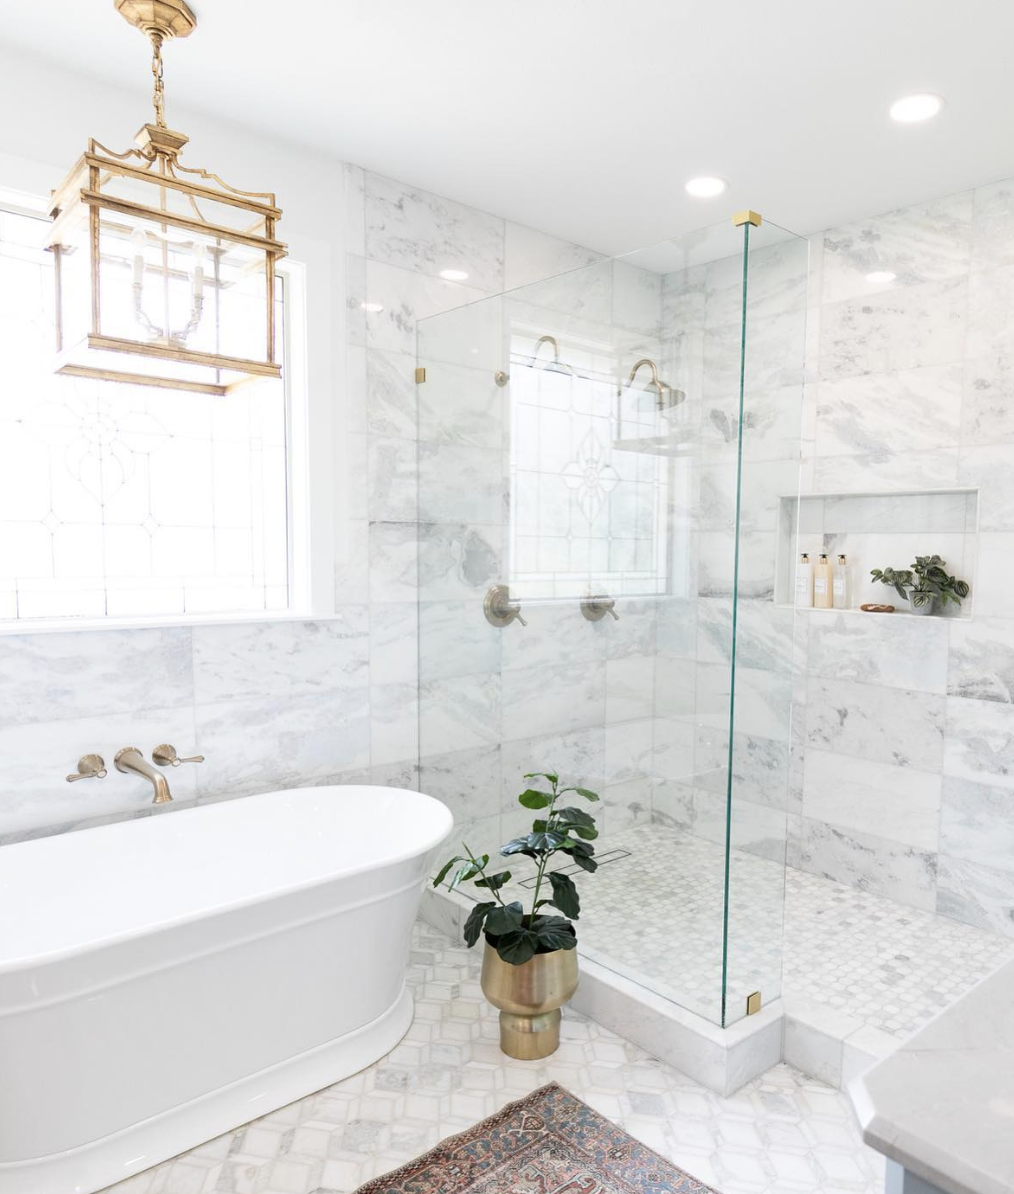 Top 10 Bathroom Tile Trends for 2023; bathroom tile trends that are expected to dominate the market this year.